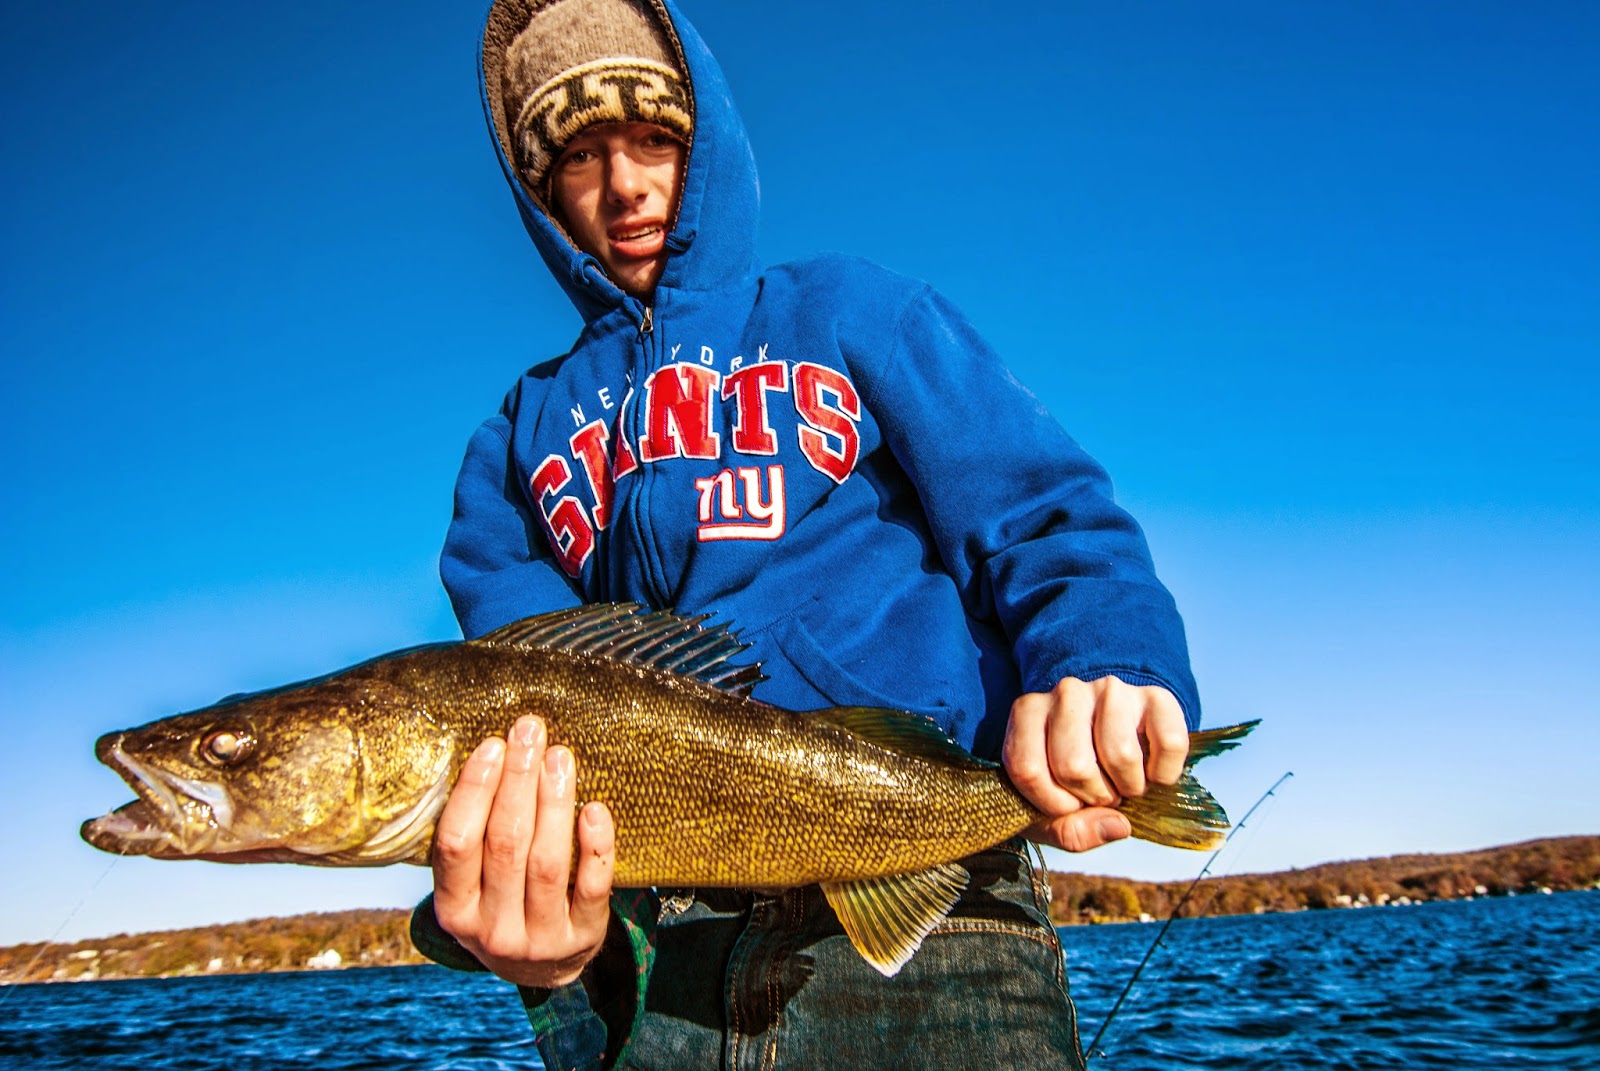 Litton's Fishing Lines: The Line on Hybrid Stripers and Walleye